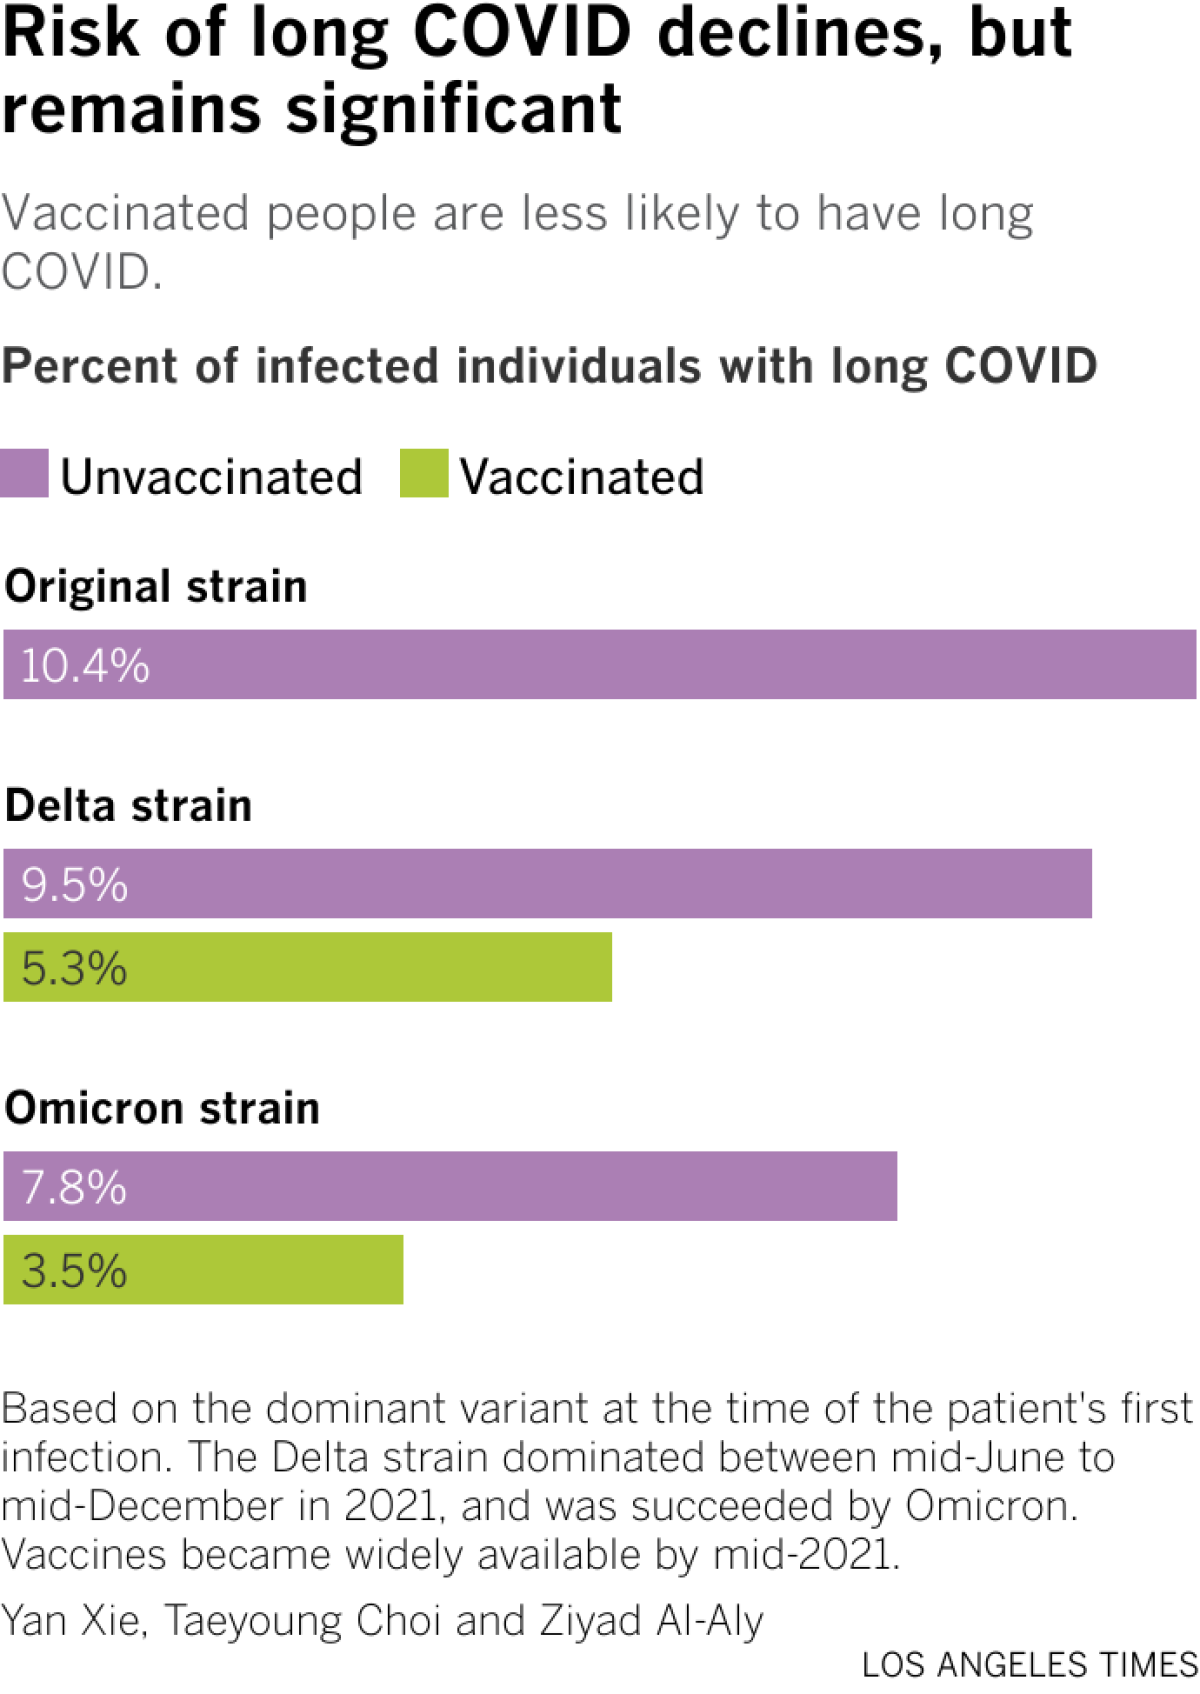 This chart shows how the risk of long COVID was far worse during the first year or so of the pandemic, where 10% of people with COVID suffered long COVID symptoms. Vaccinated people 